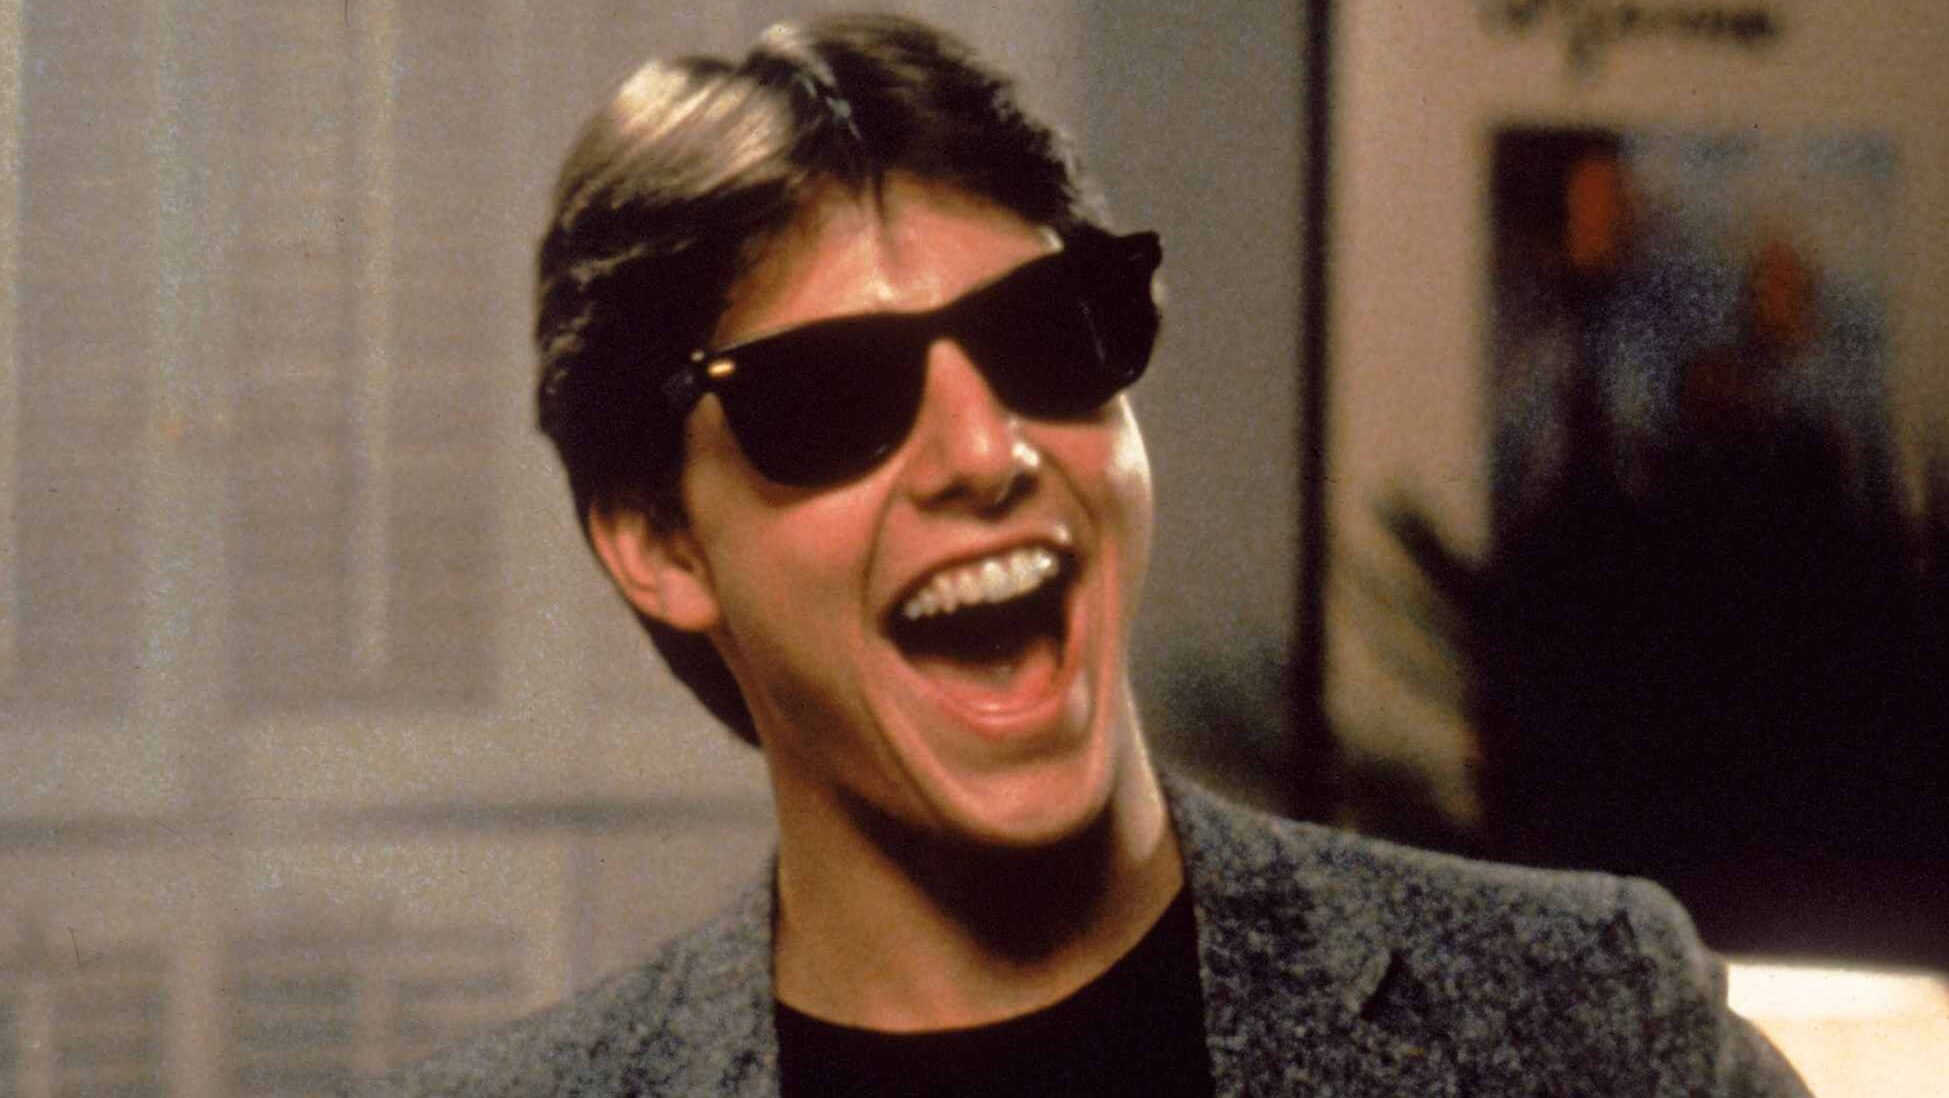 Tom Cruise wearing Ray-Ban sunglasses in Risky Business